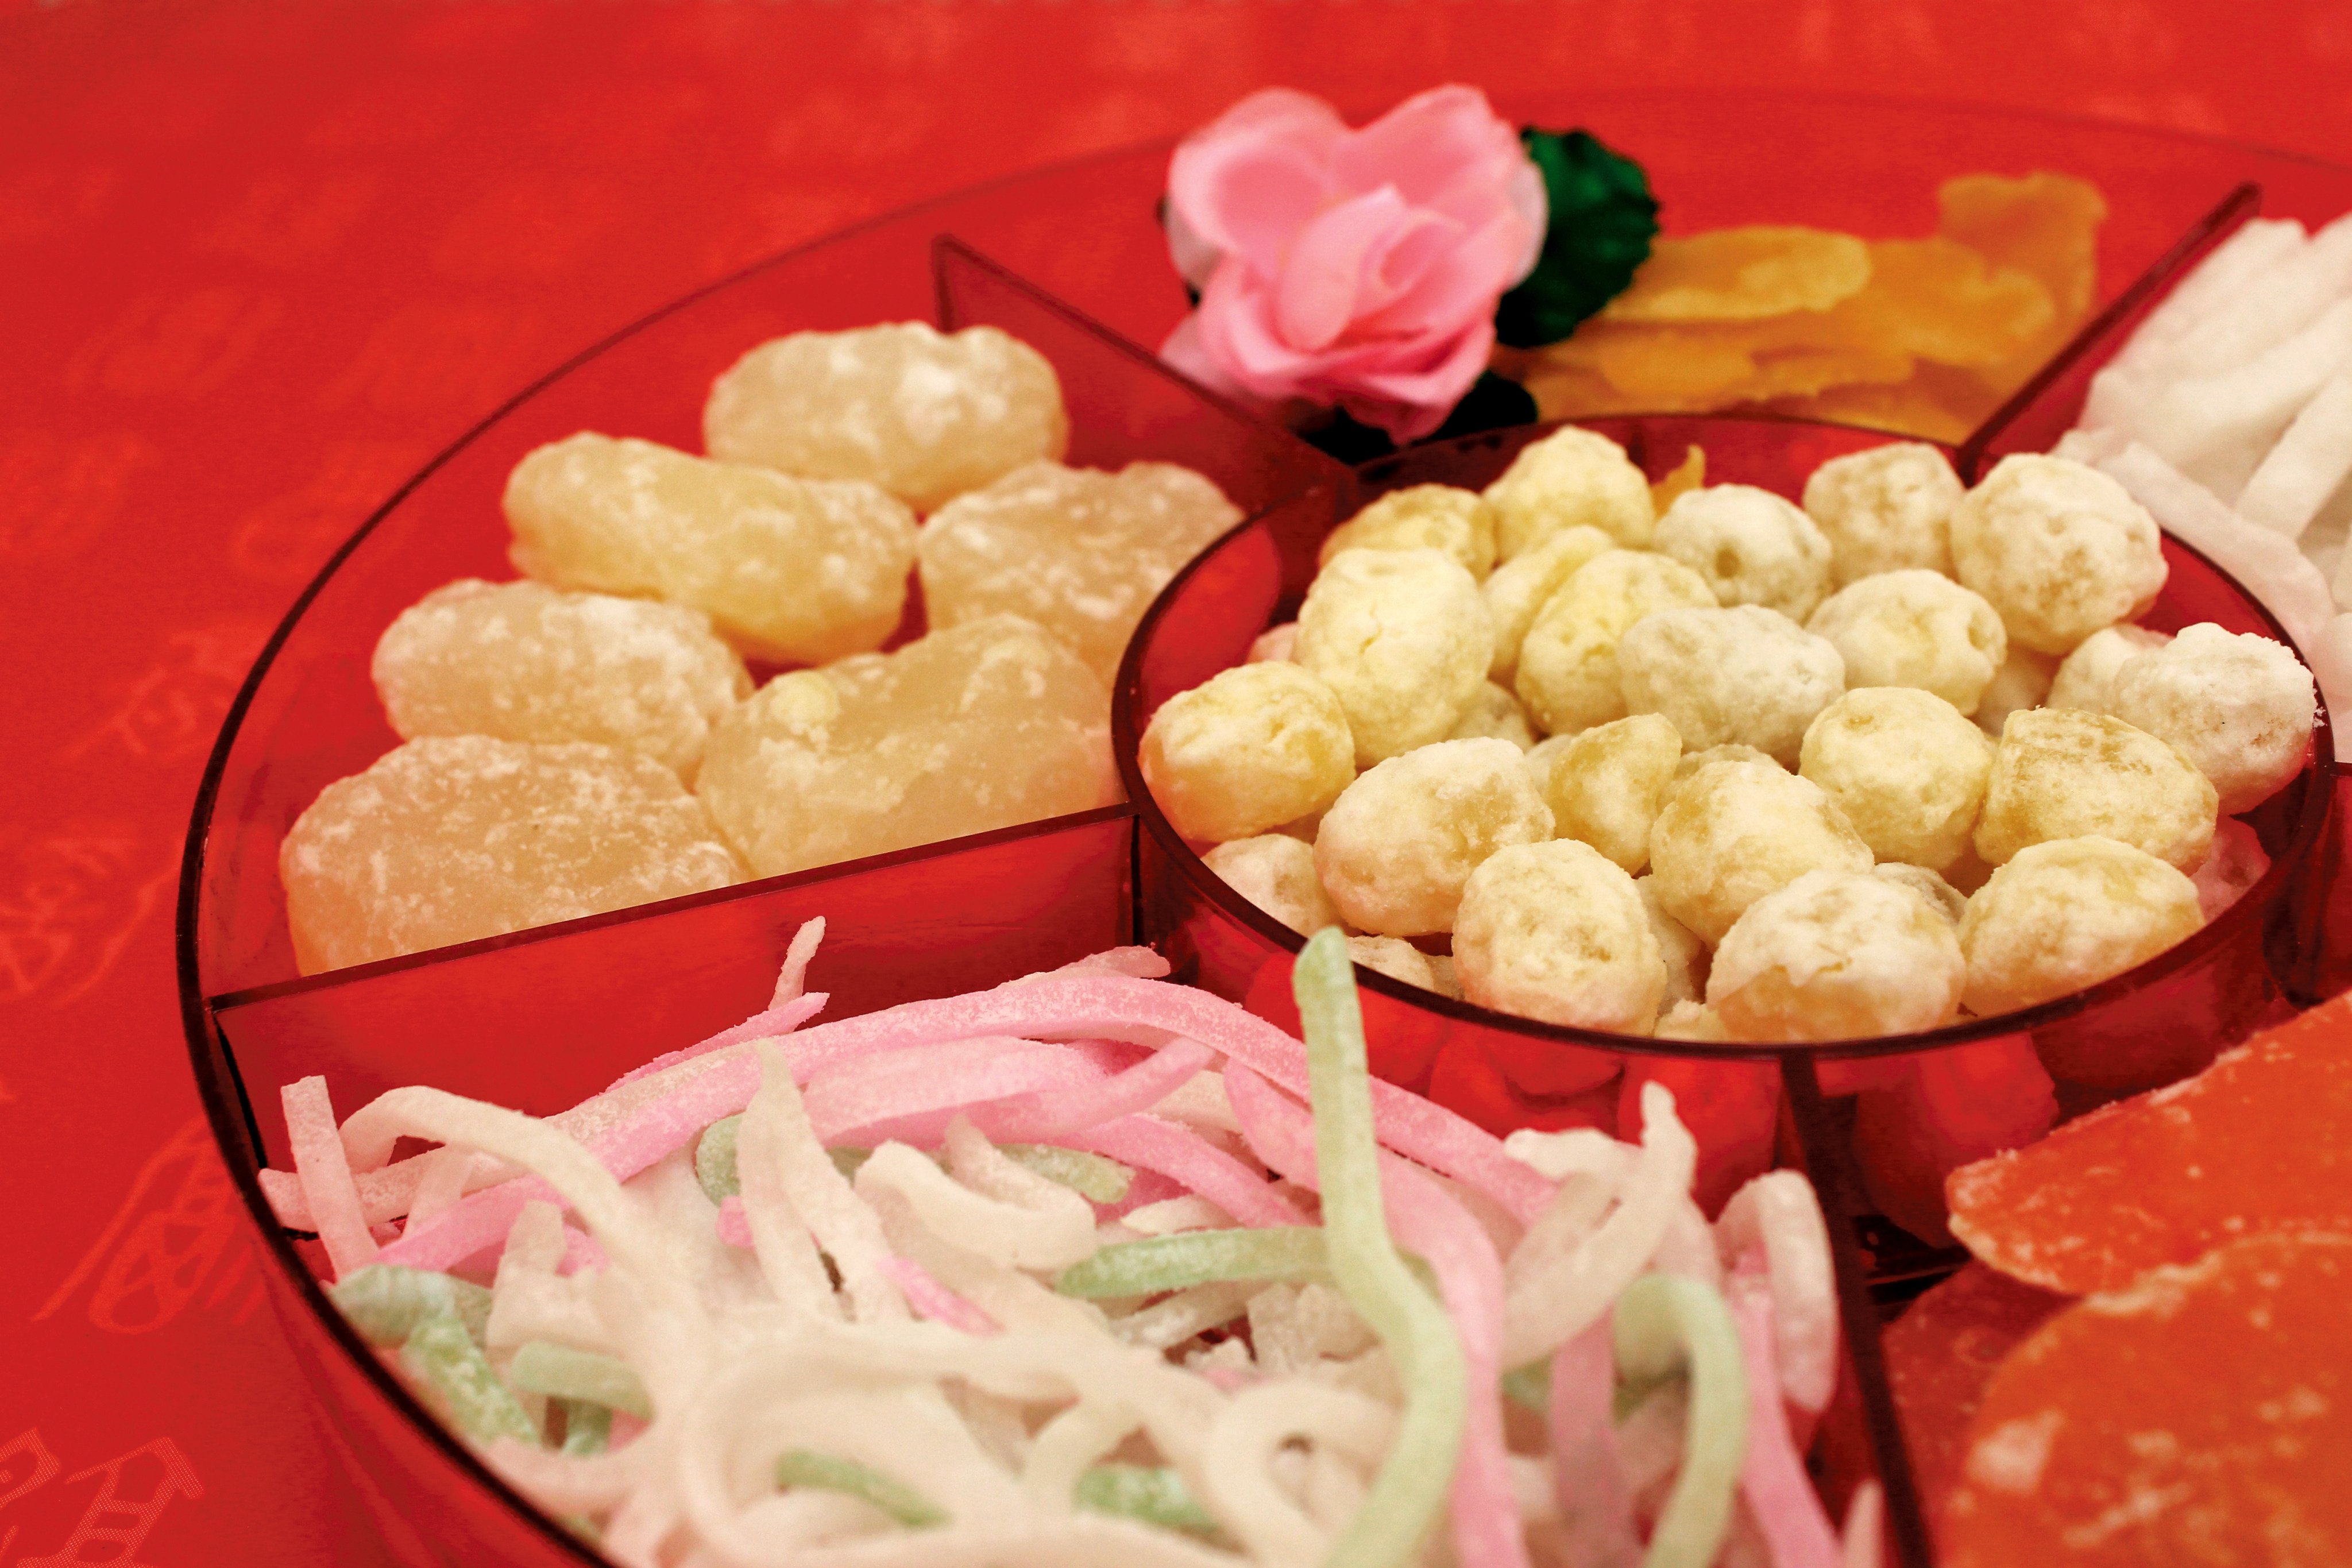 The traditional Chinese candy box for Lunar New Year has lots of sweet treats. Photo: Shutterstock